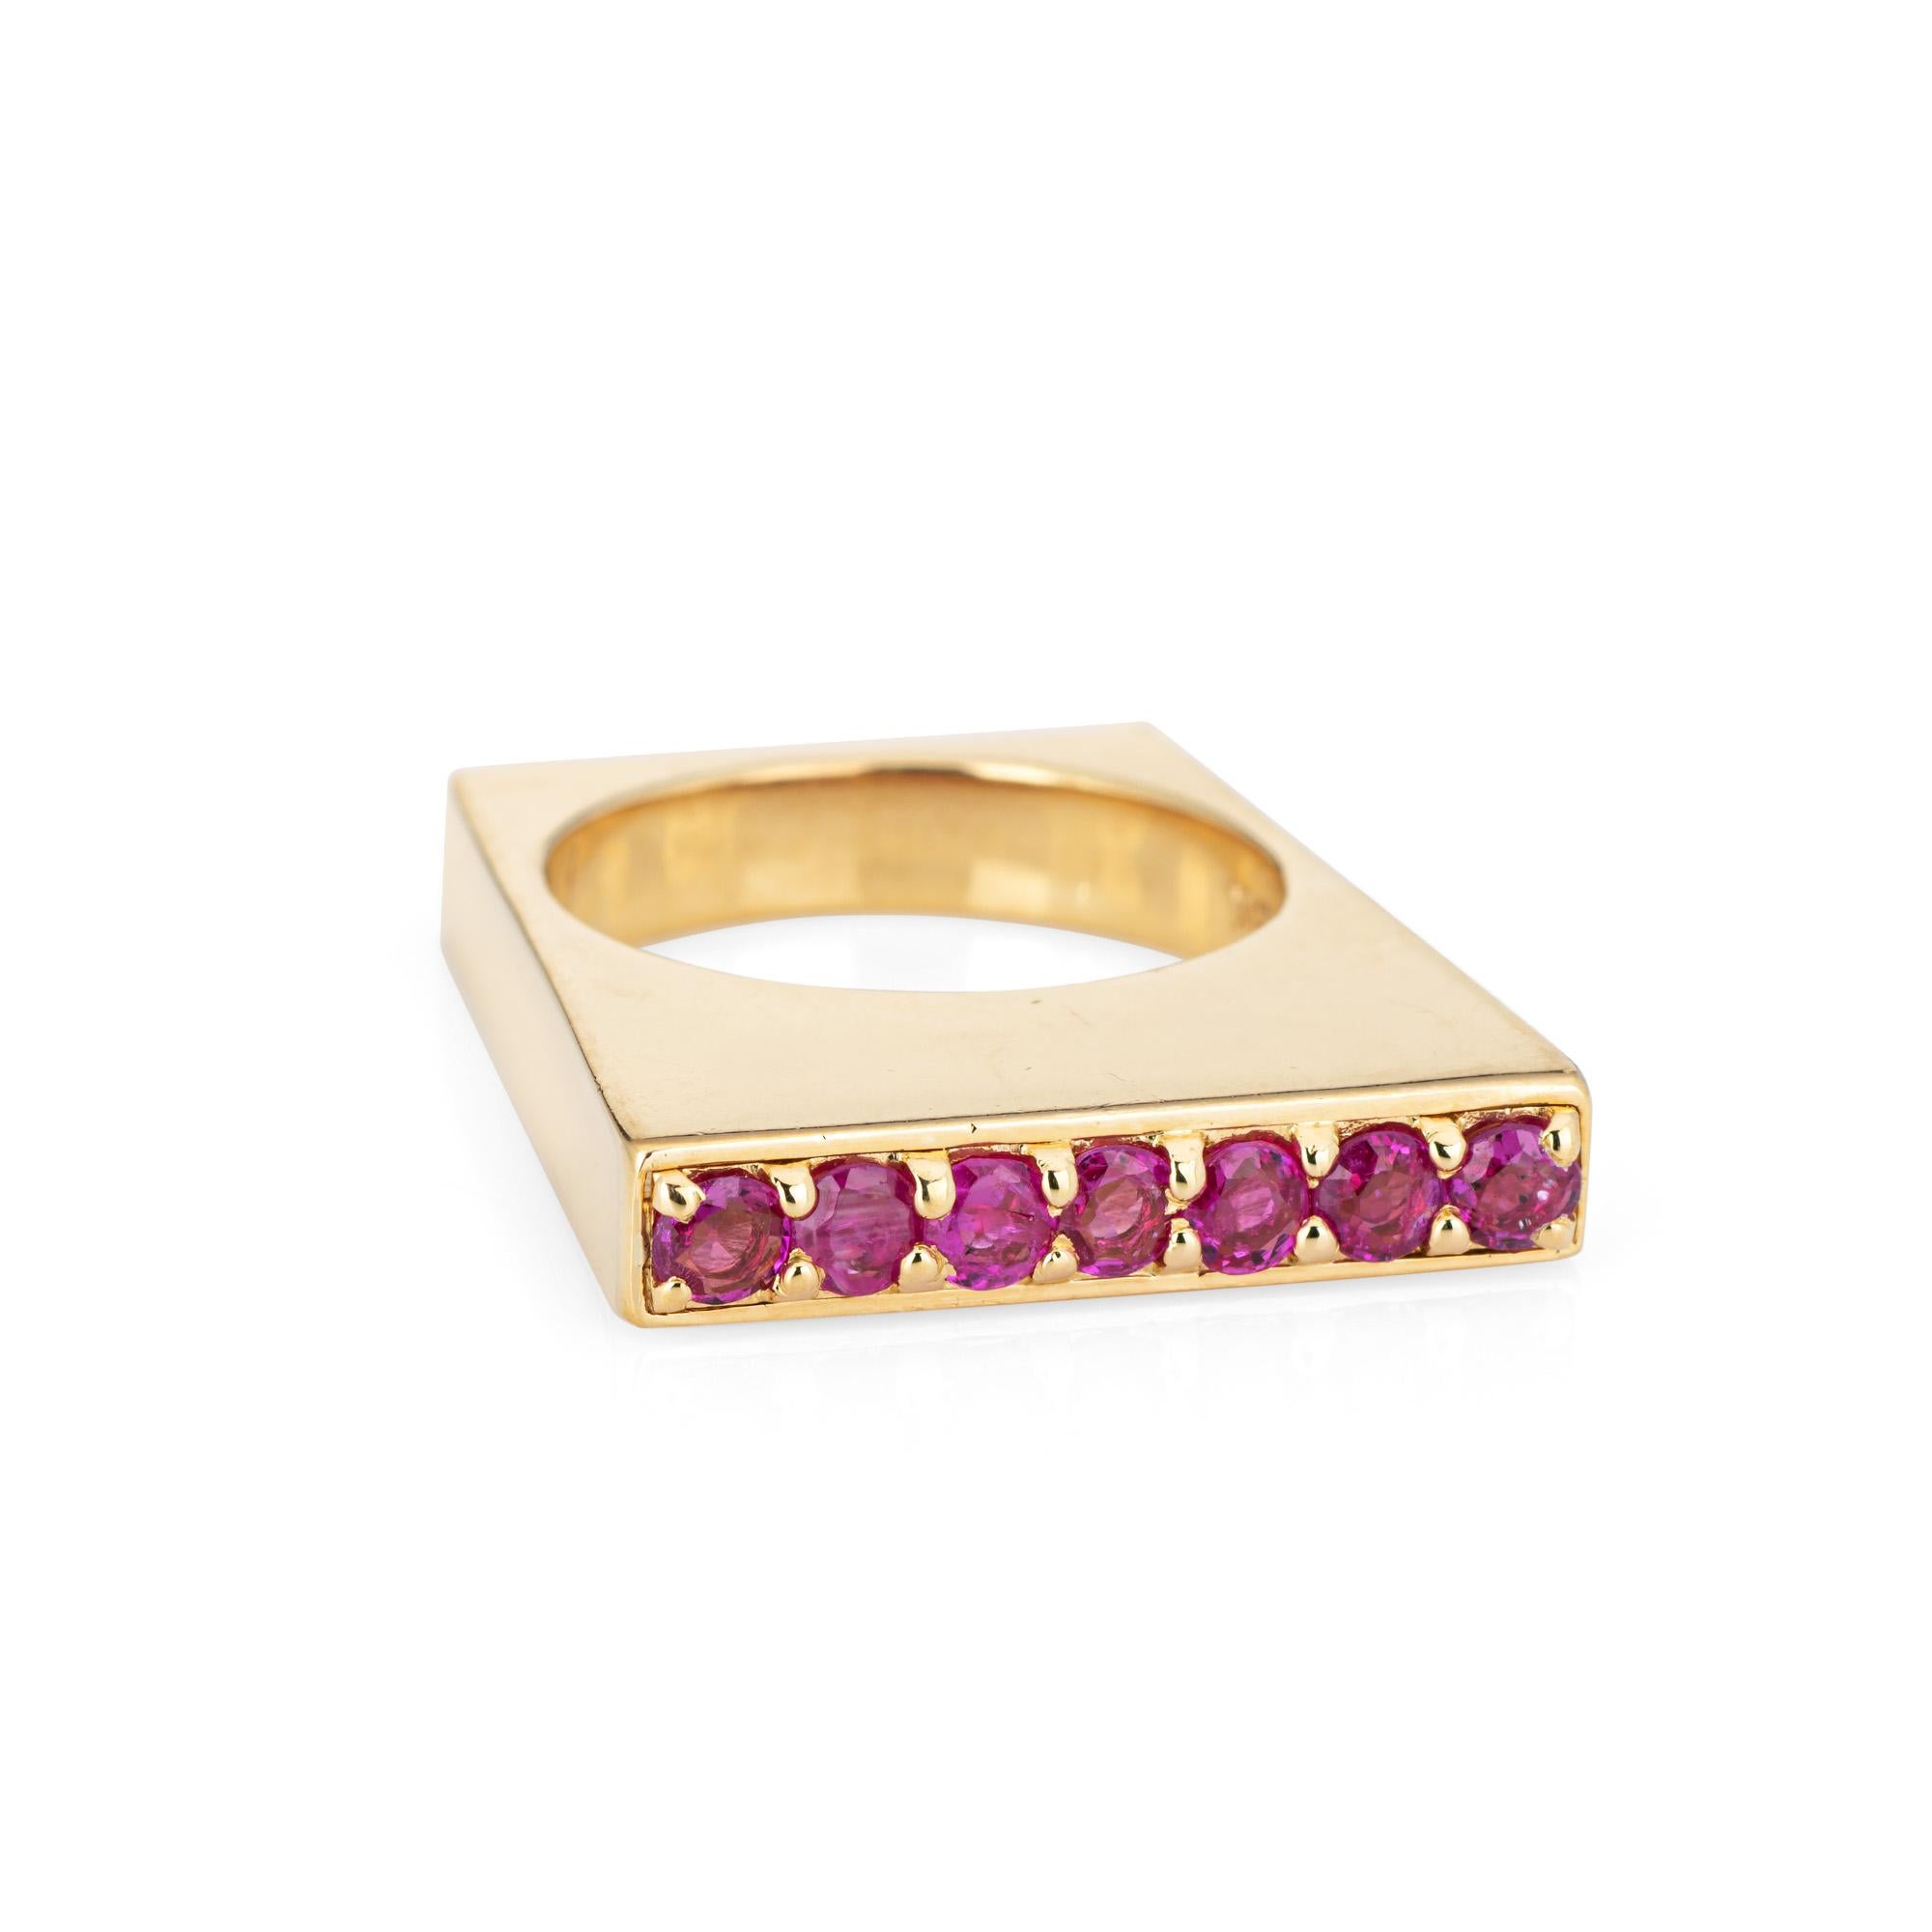 Vintage Tiffany & Co square ruby ring, crafted in 18k yellow gold (circa 1970s).  

7 rubies are estimated at 0.05 carats each and total an estimated 0.35 carats. The rubies are in good condition with a few minor chips visible under a 10x loupe.